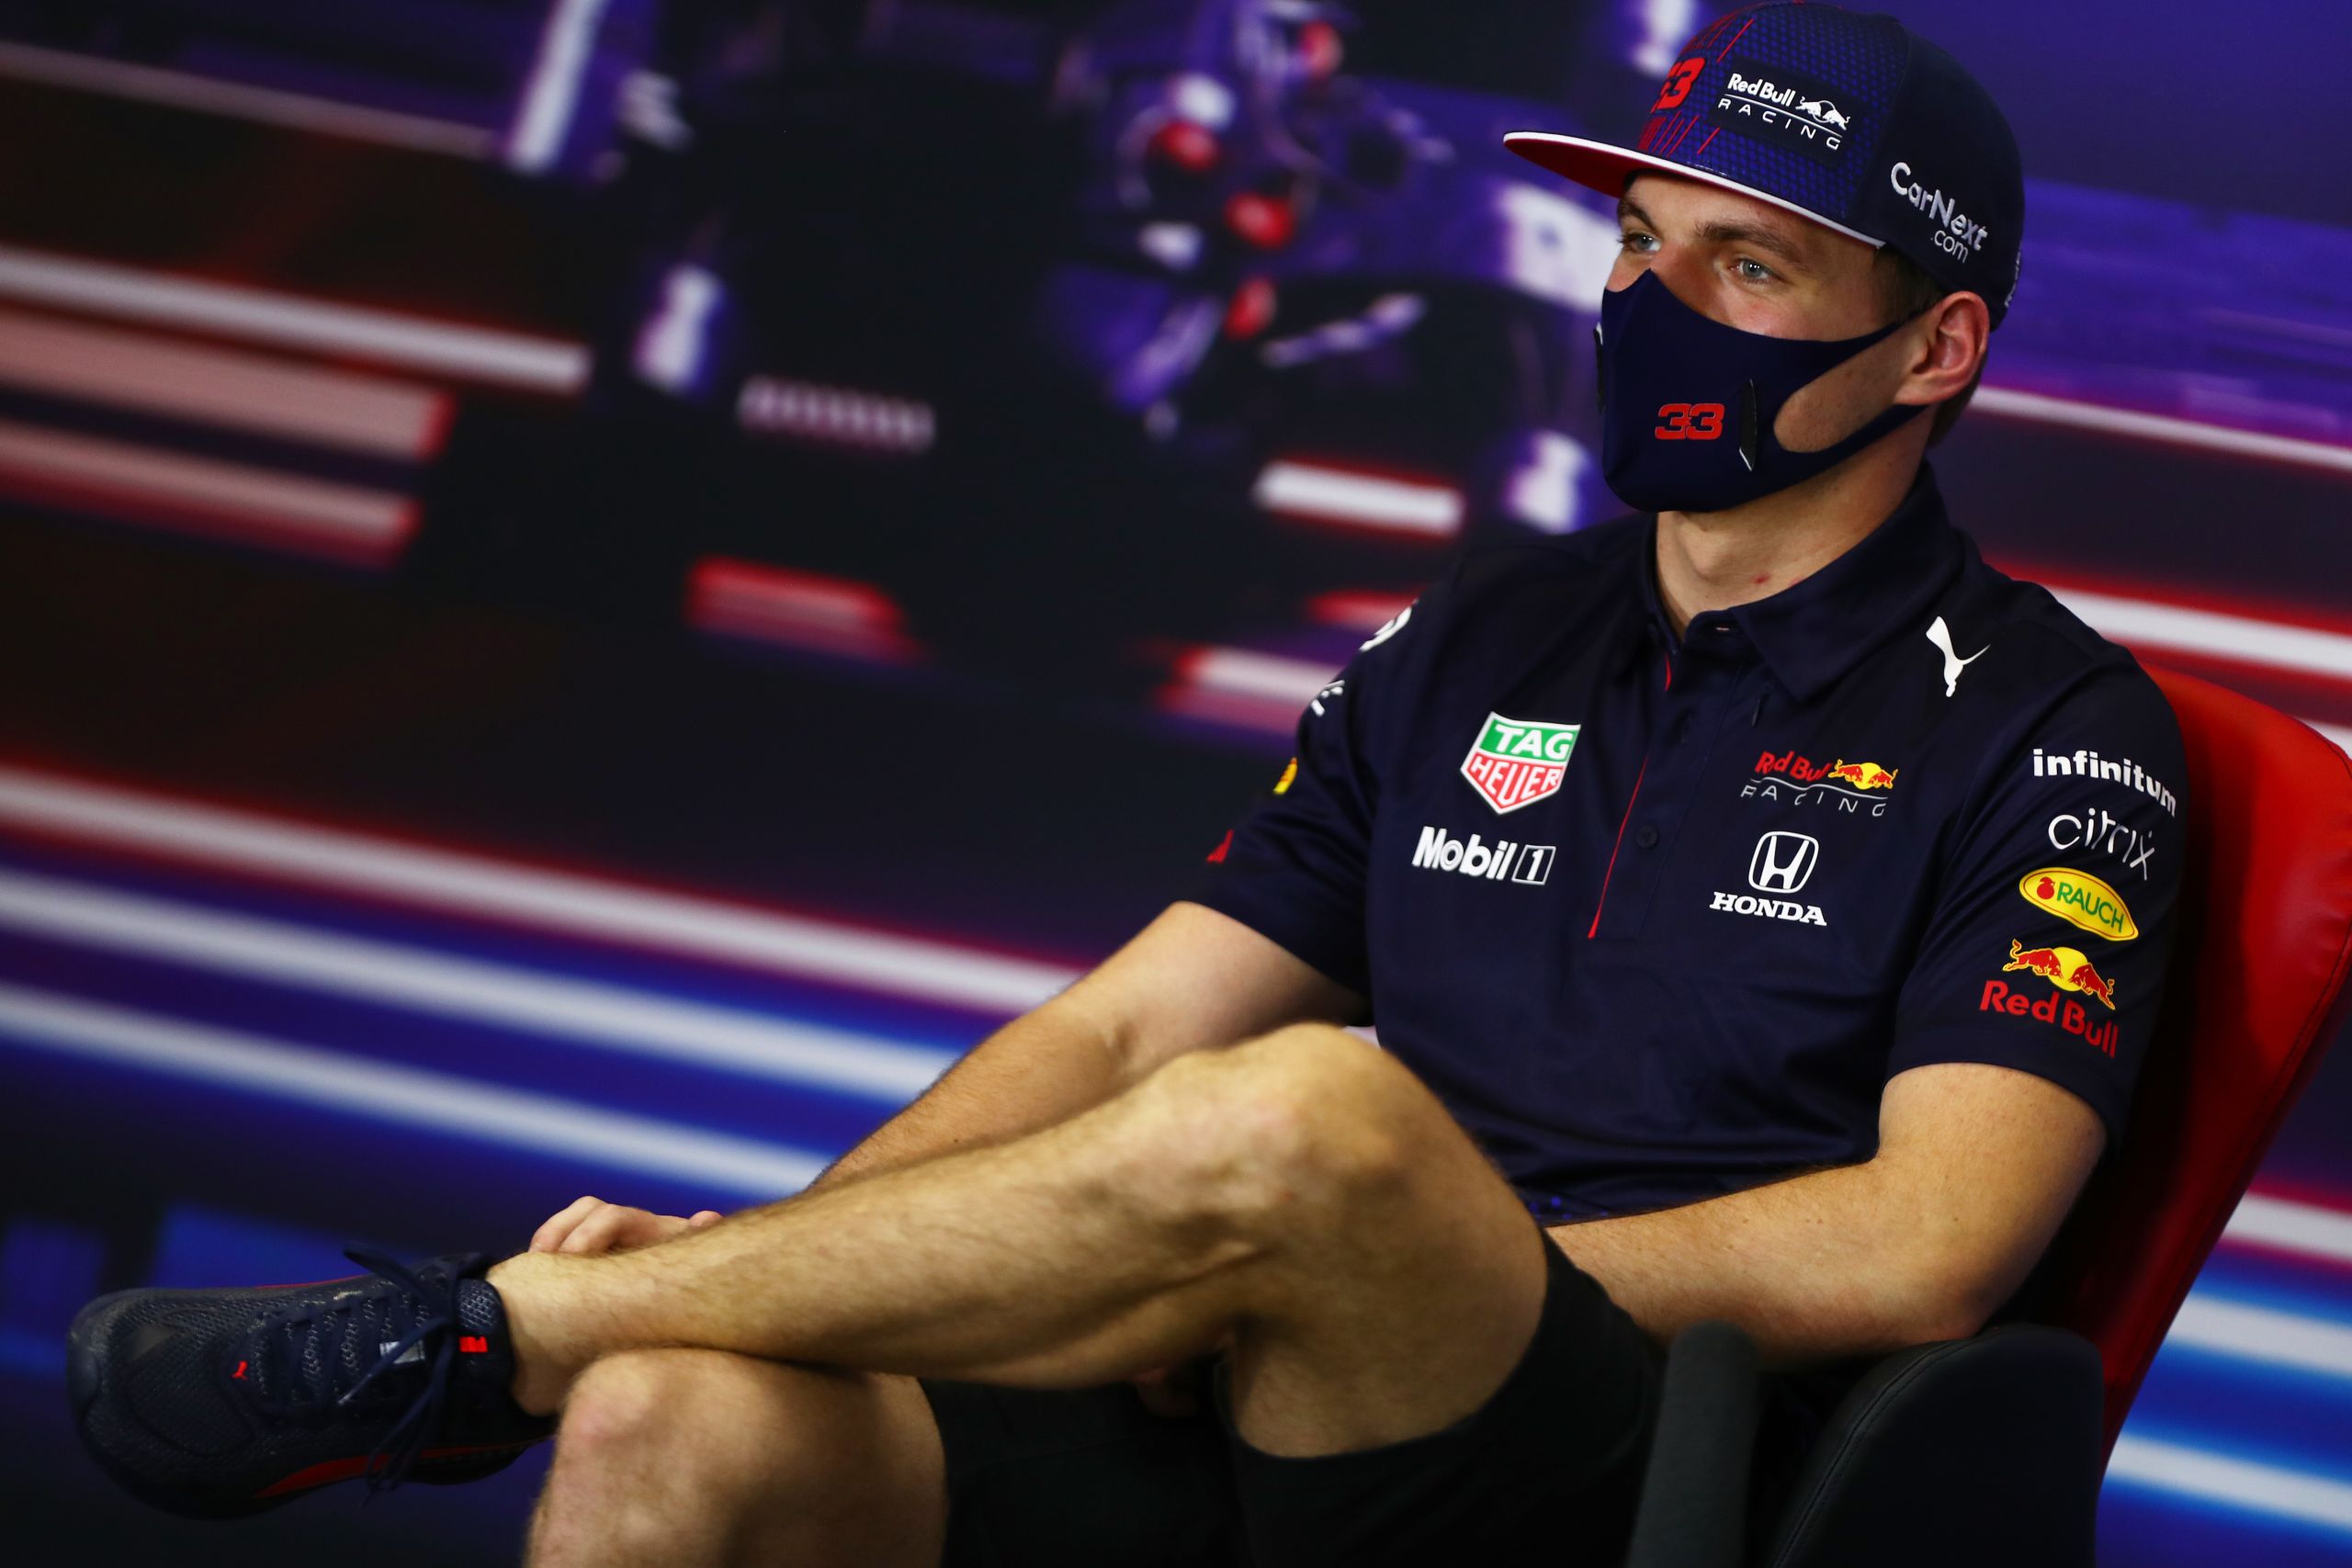 Verstappen says he hasn't changed but has become a more complete racing driver